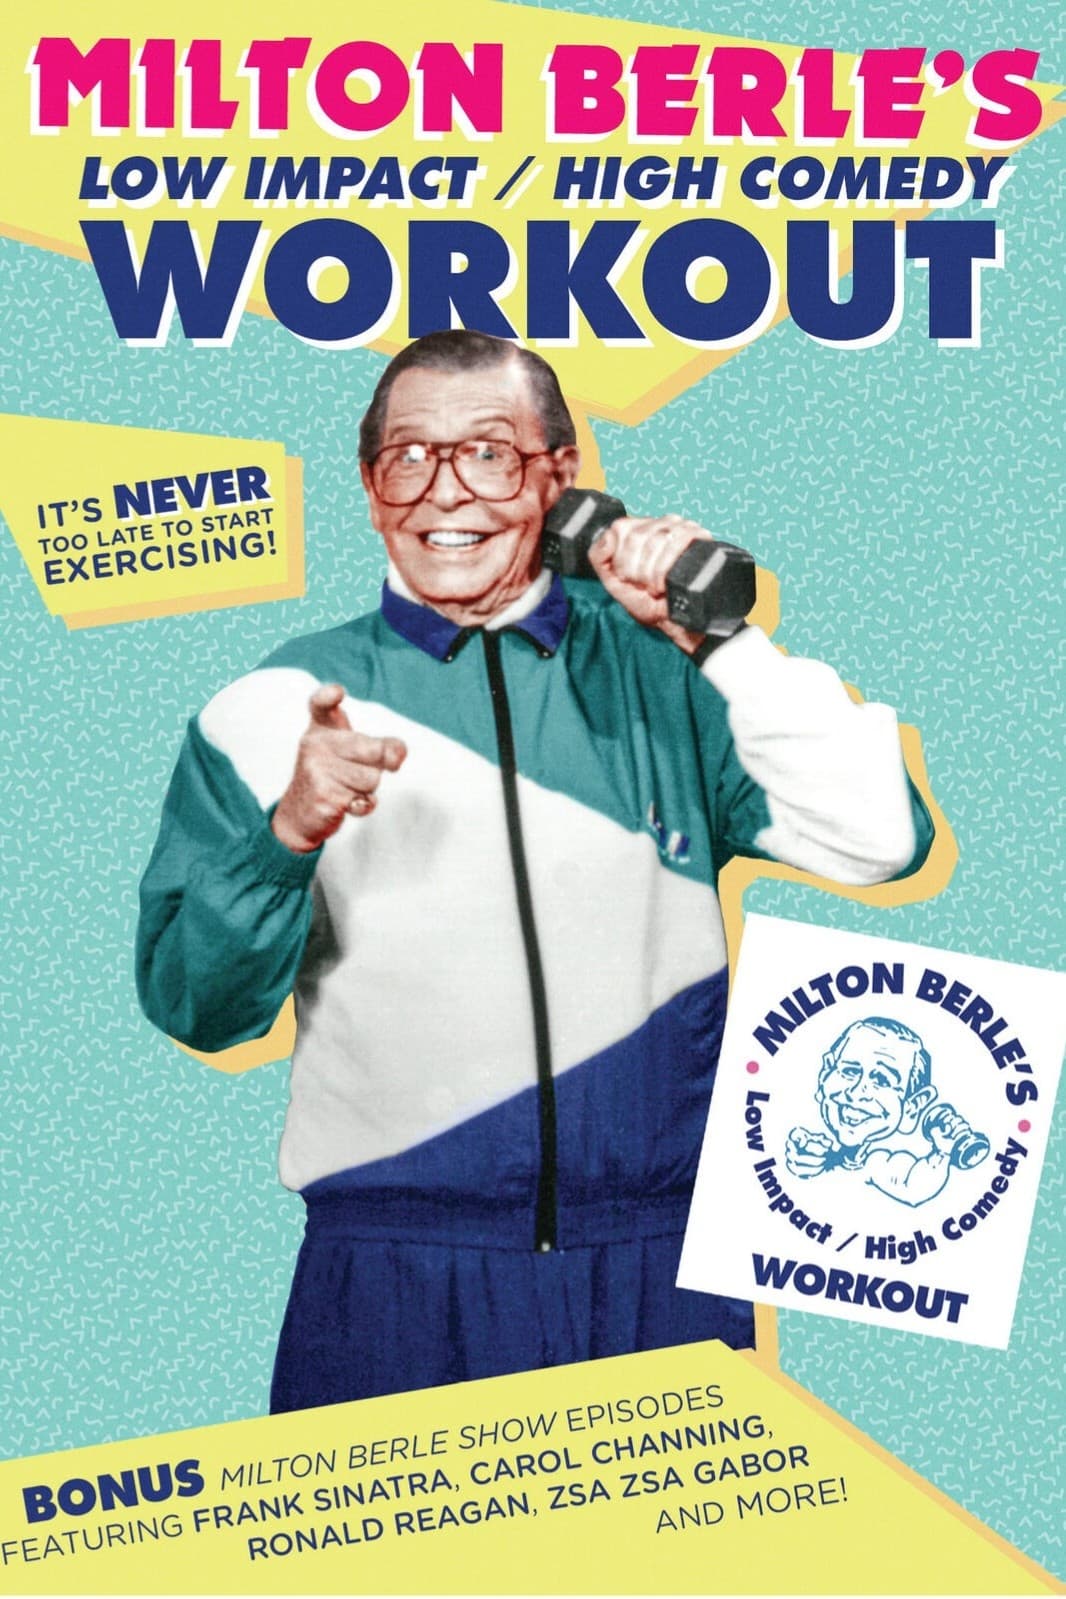 Milton Berle's Low Impact/High Comedy Workout